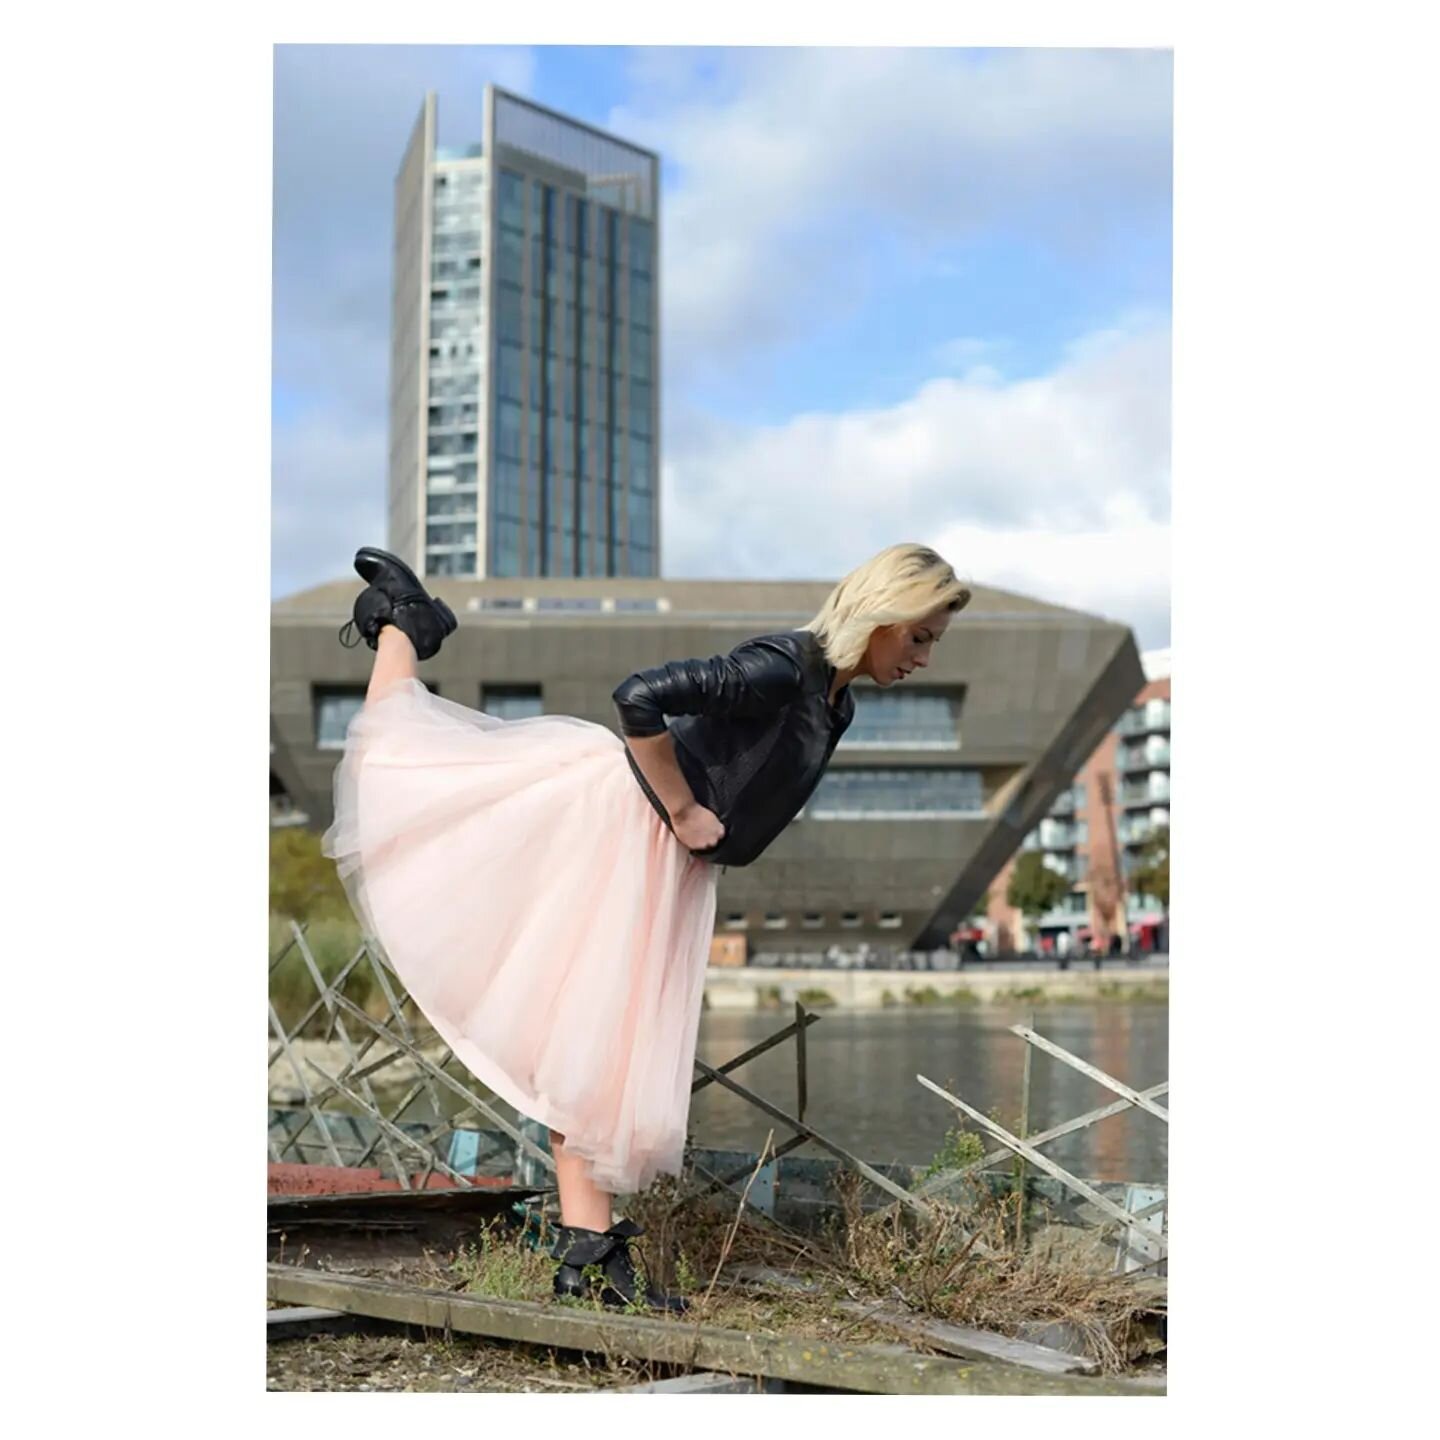 CANADA WATER

dancer: Ana Badea

Part of my photography series of improvised contemporary dance with local artists using streets and other public spaces as stages.

#improvised #contemporarydance dance #london  #architecture #water #canadawater #seri